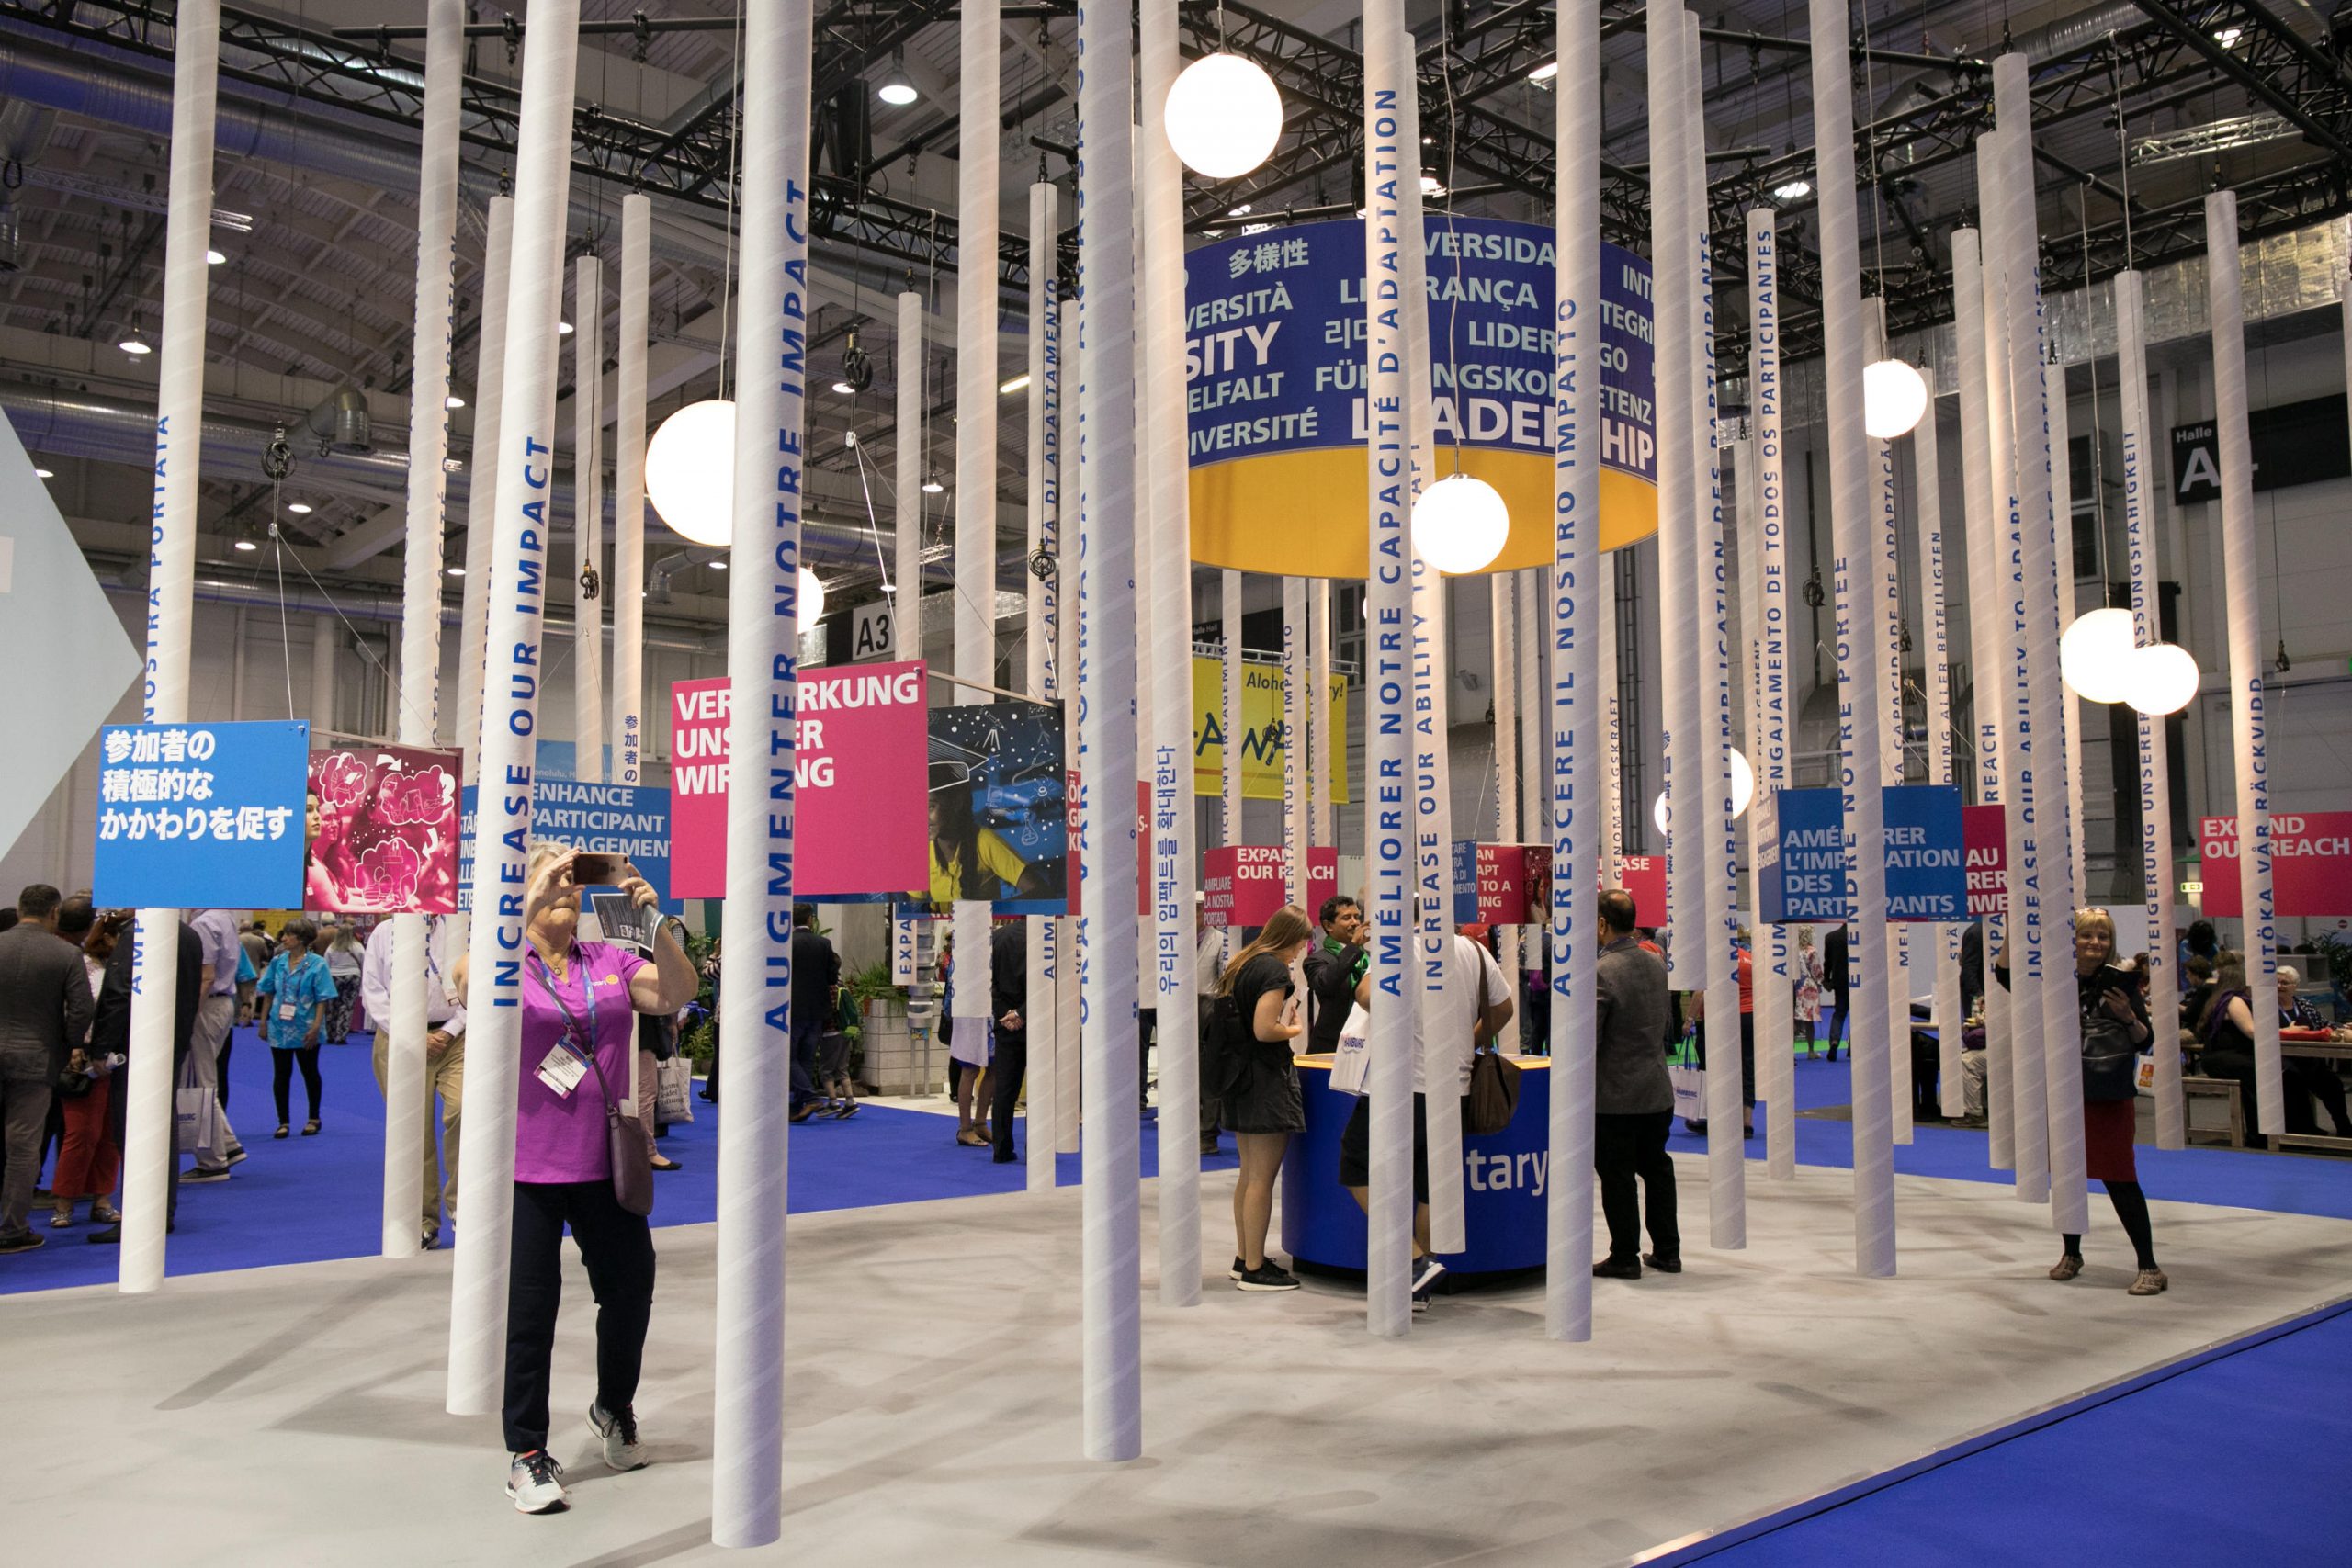 Large vertical poles with words signifying Rptary's impact and mission, people taking pictures among the display area